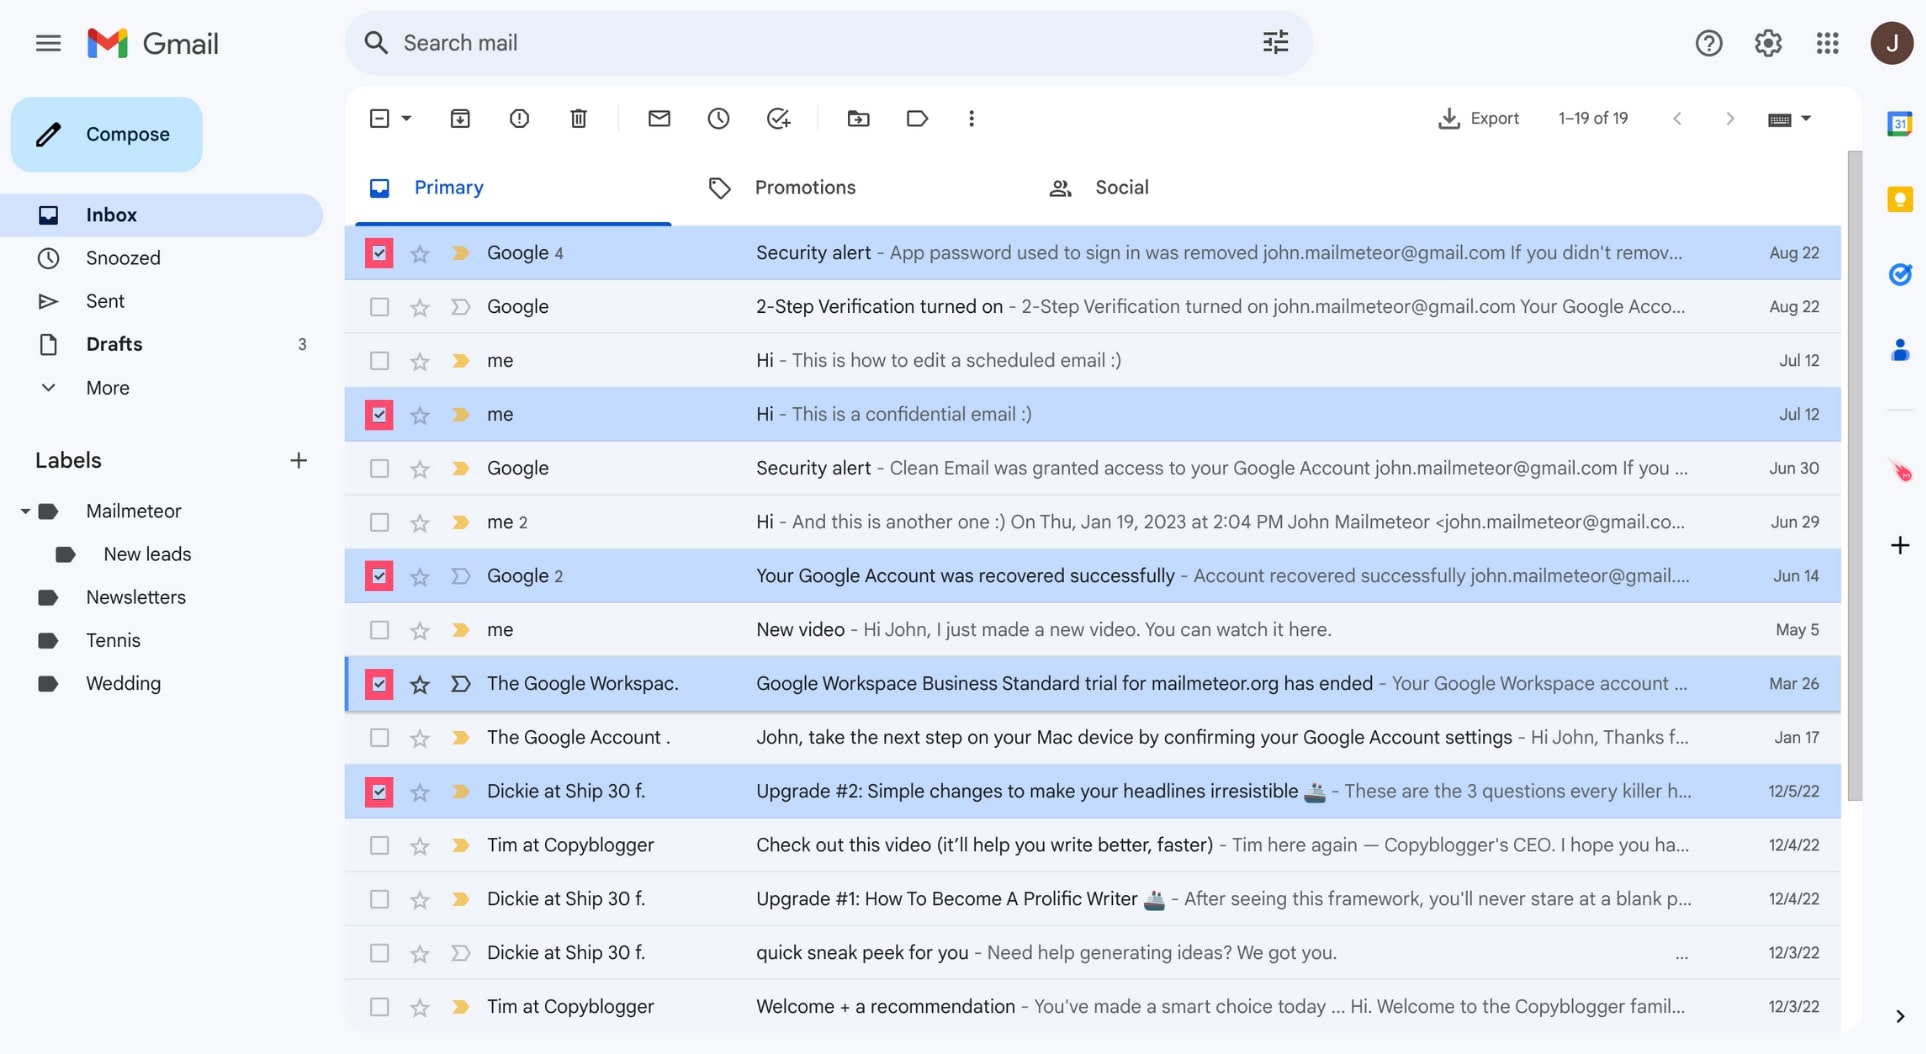 How to select multiple emails in Gmail